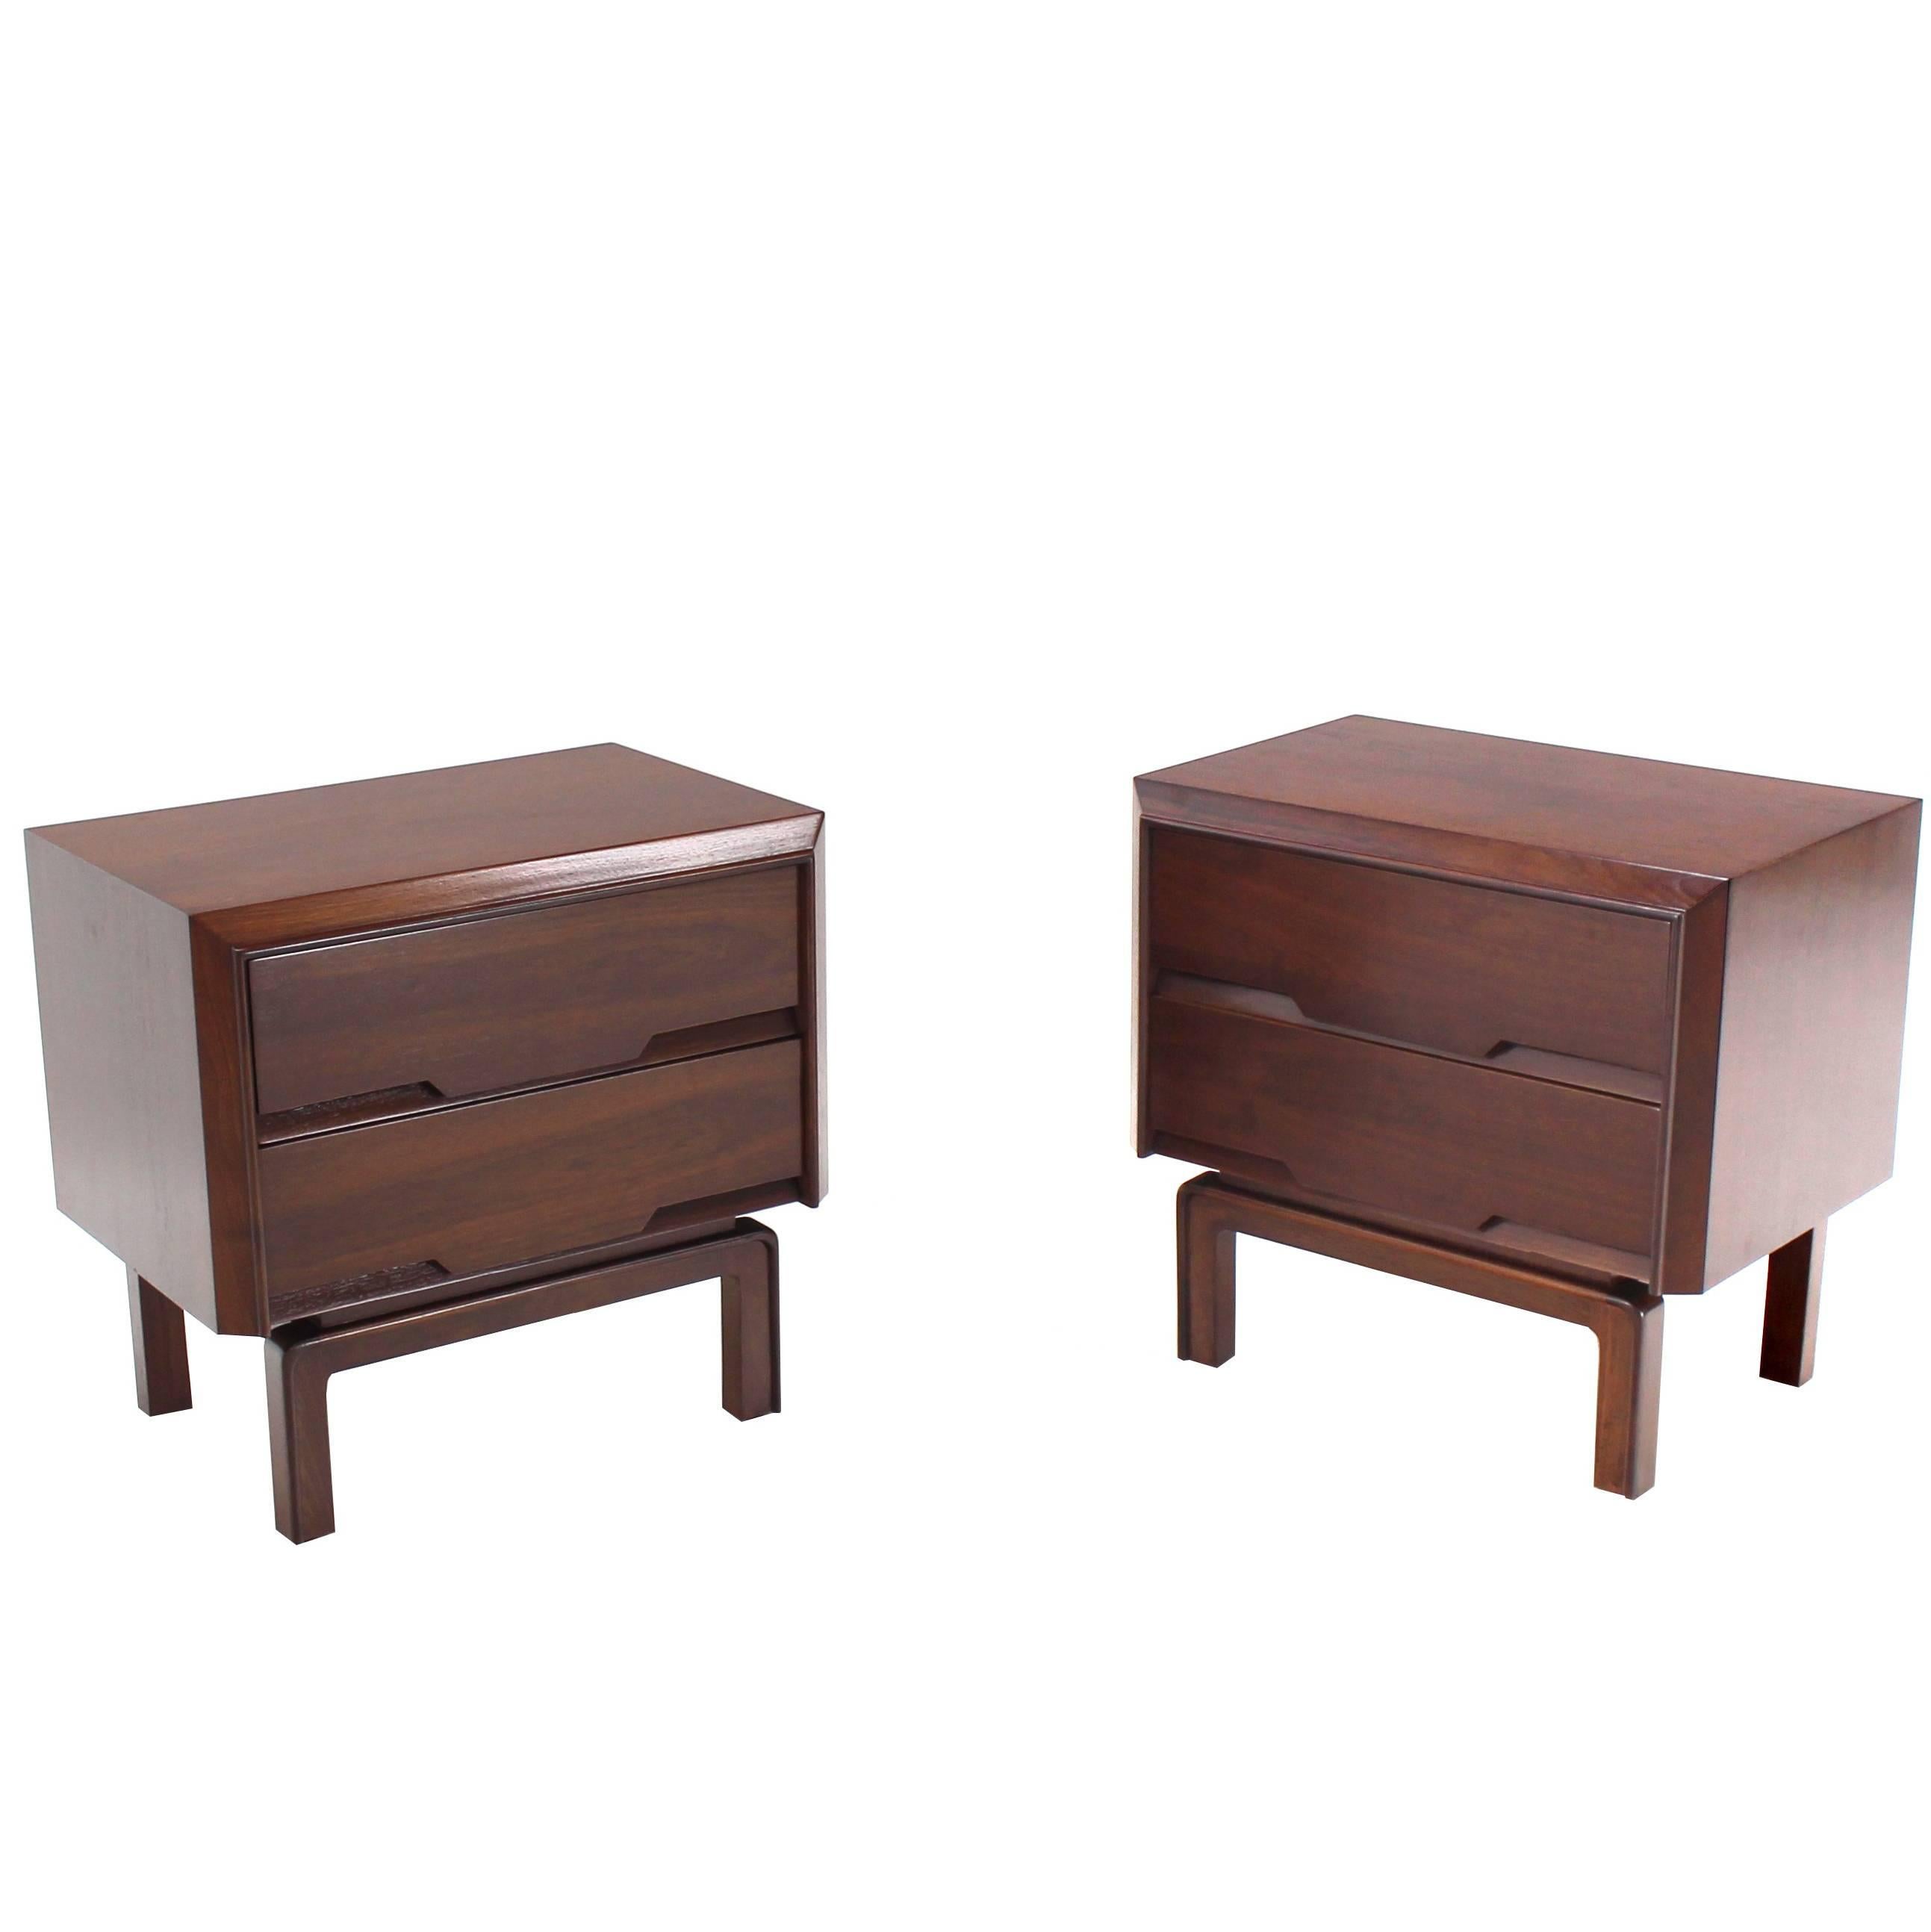 Pair of Danish Mid Century Modern Walnut End Tables Two Drawer Stands For Sale